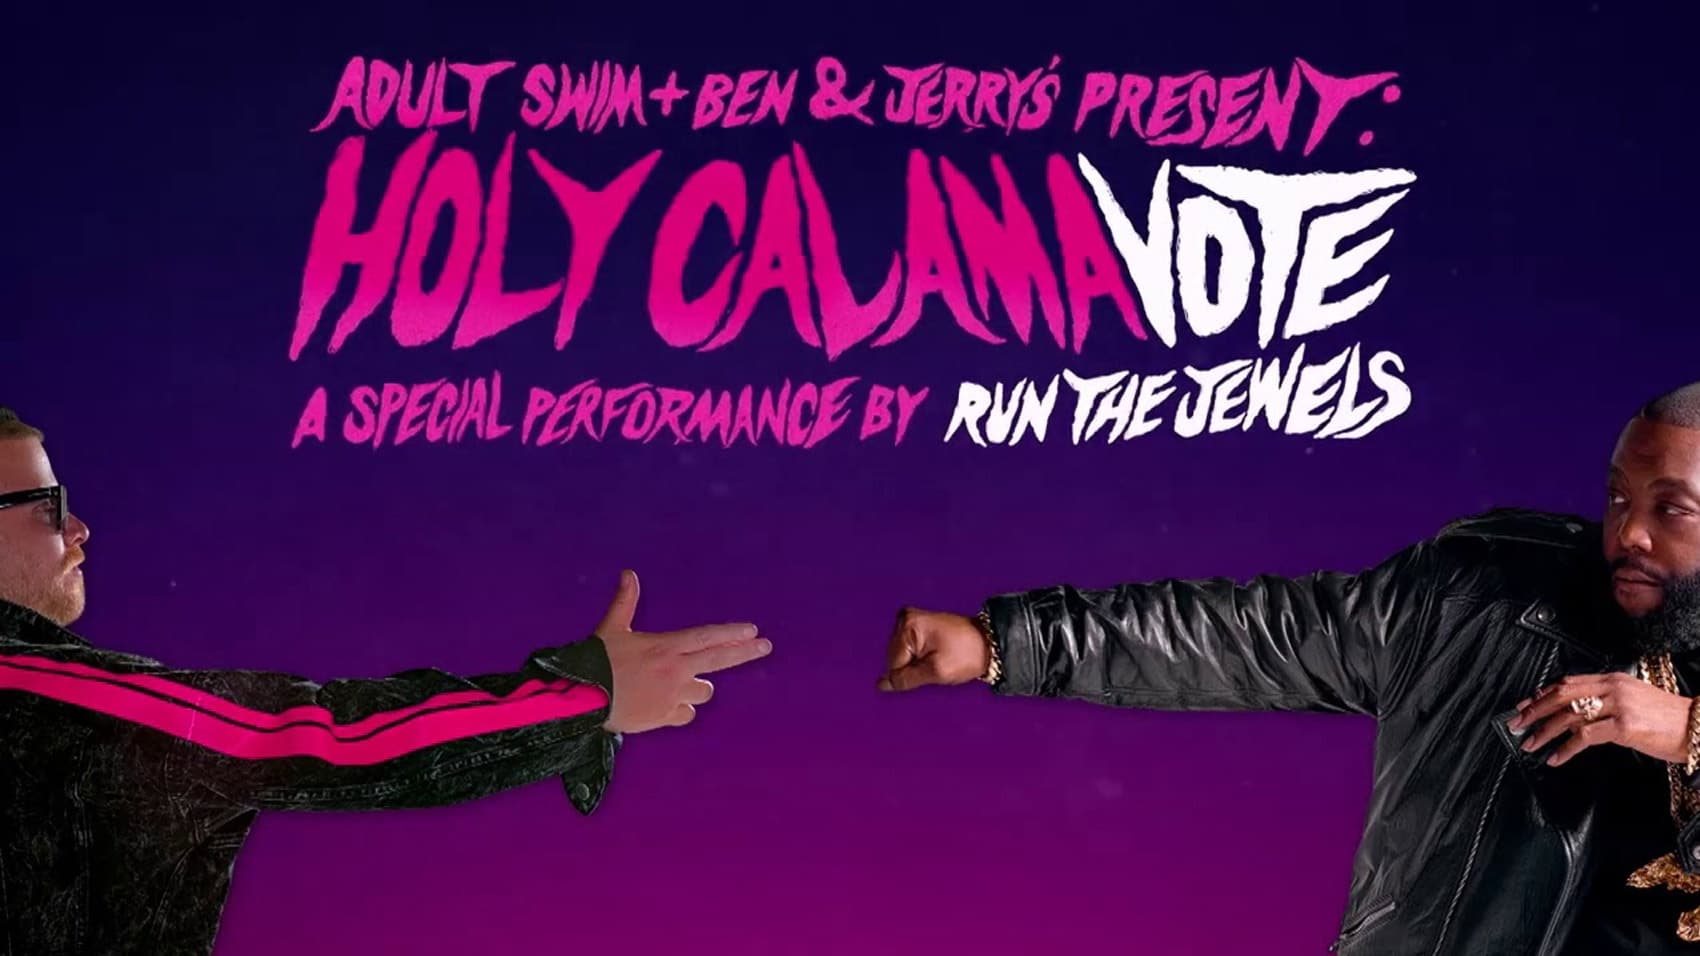 Holy Calamavote – A Special Performance by Run The Jewels